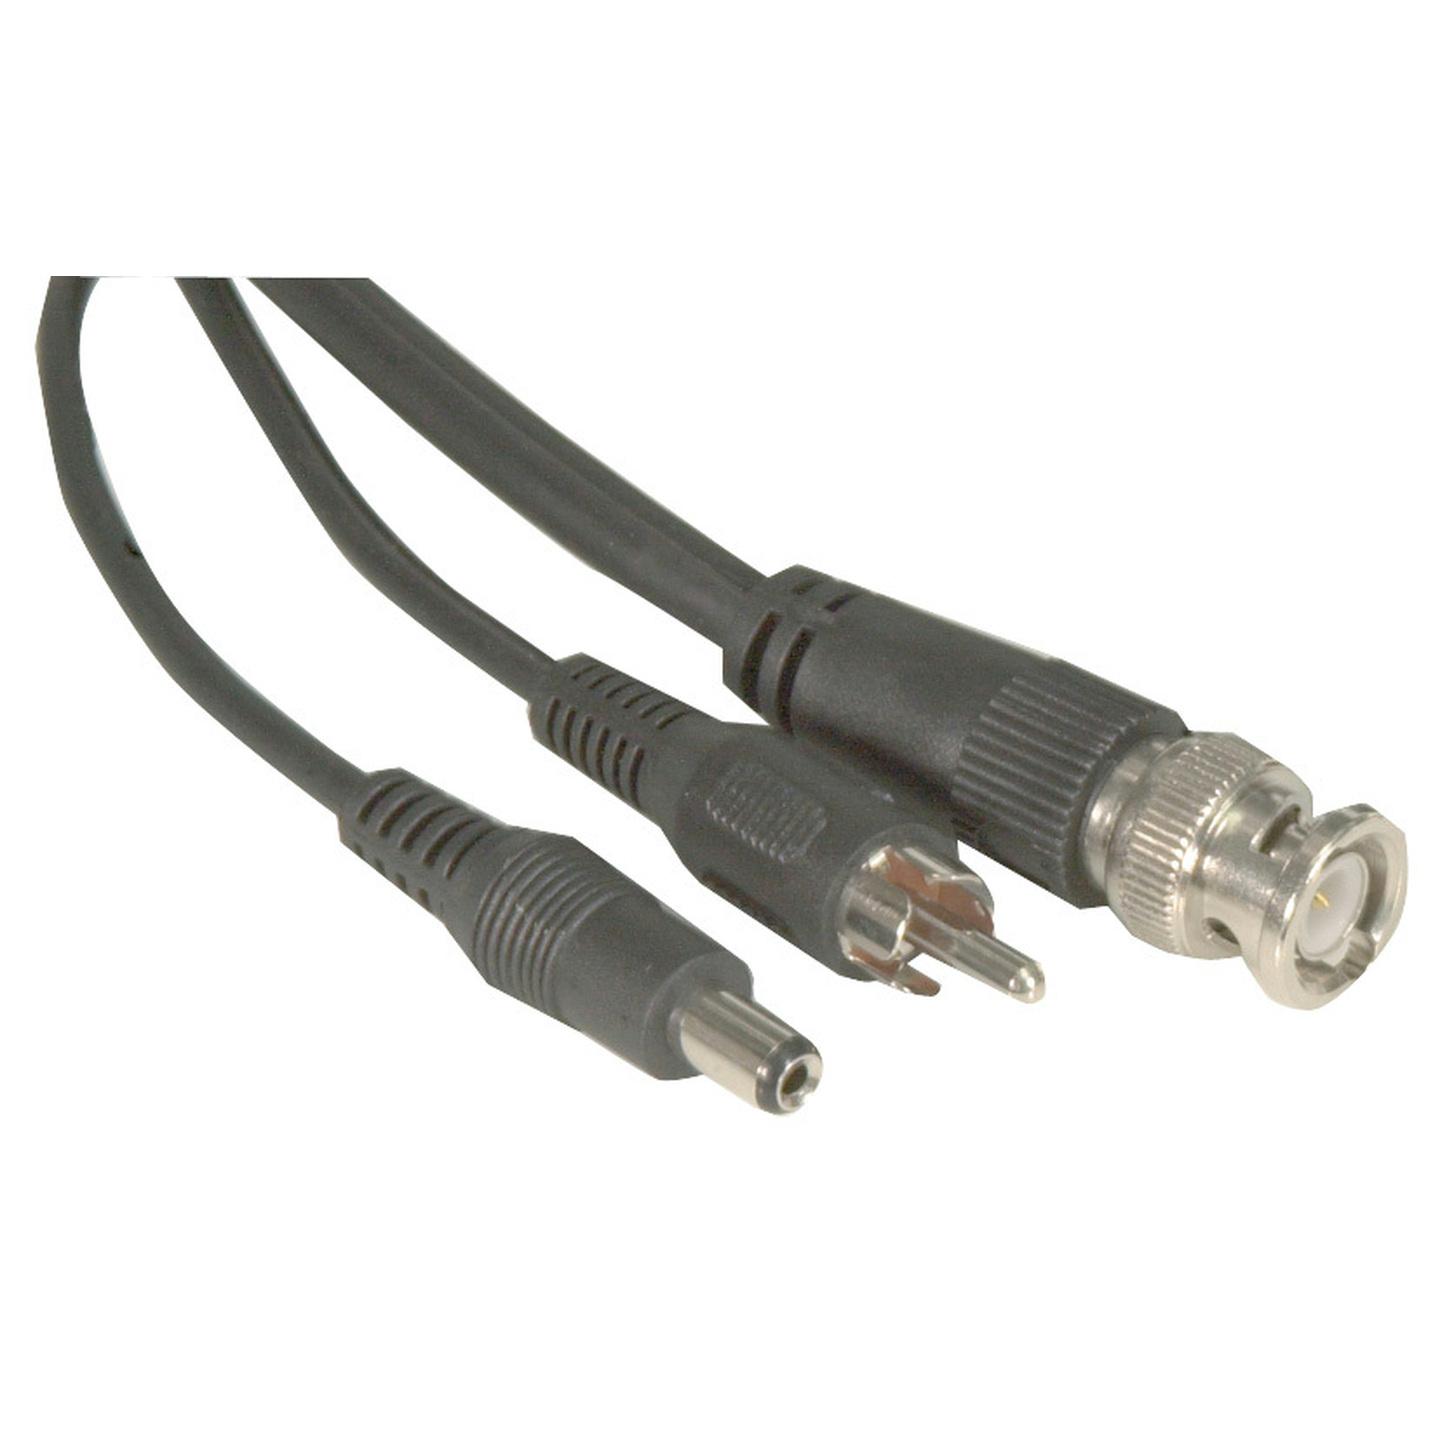 5m CCD Camera Extension Cable